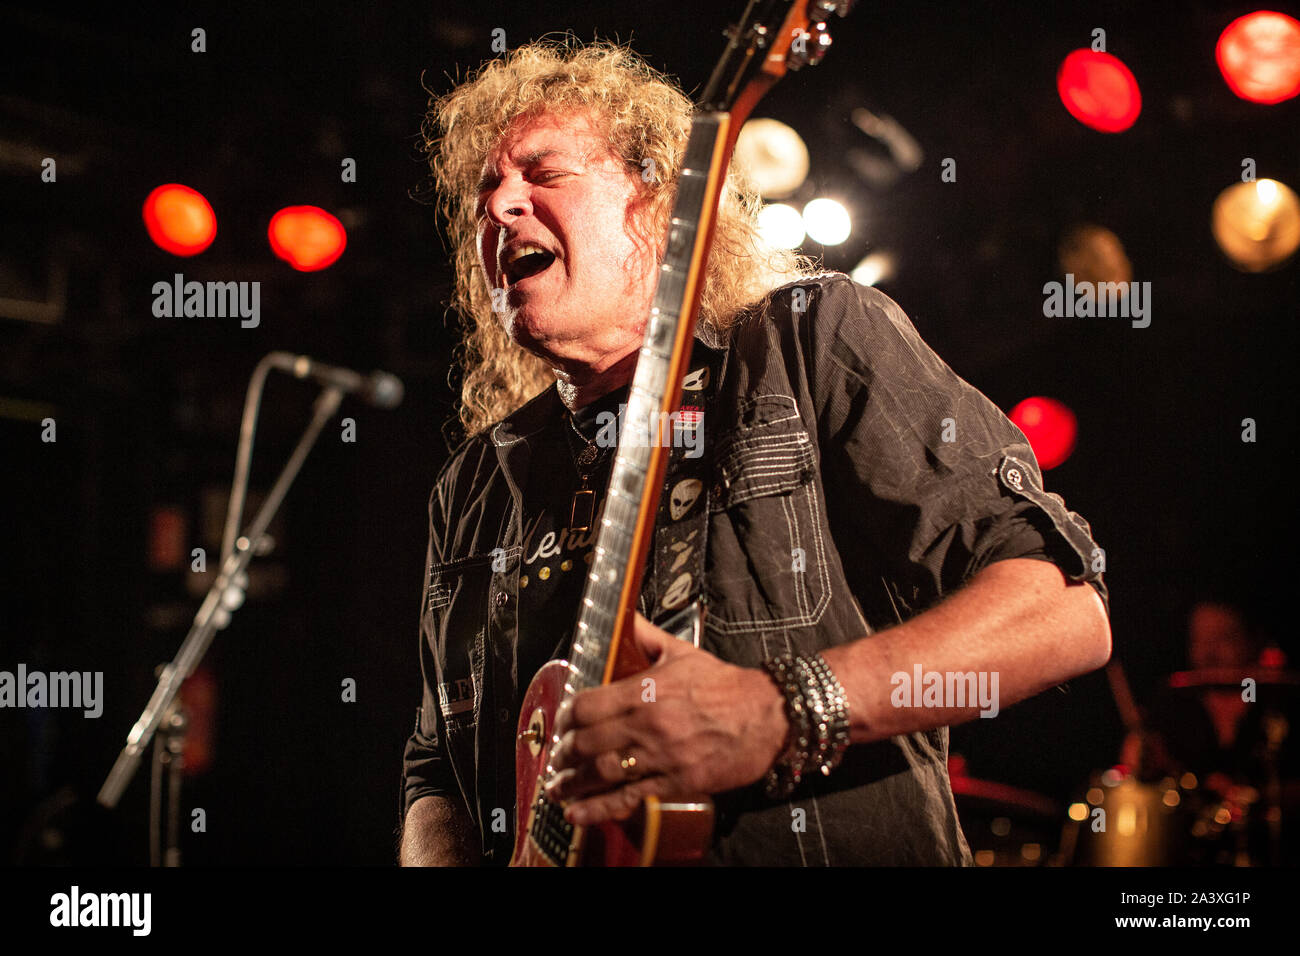 Oslo, Norway. 09th, October 2019. The American hard rock band Y&T performs a live concert at John Dee in Oslo. Here guitarist and singer Dave Meniketti is seen live on stage. (Photo credit: Gonzales Photo - Terje Dokken). Stock Photo